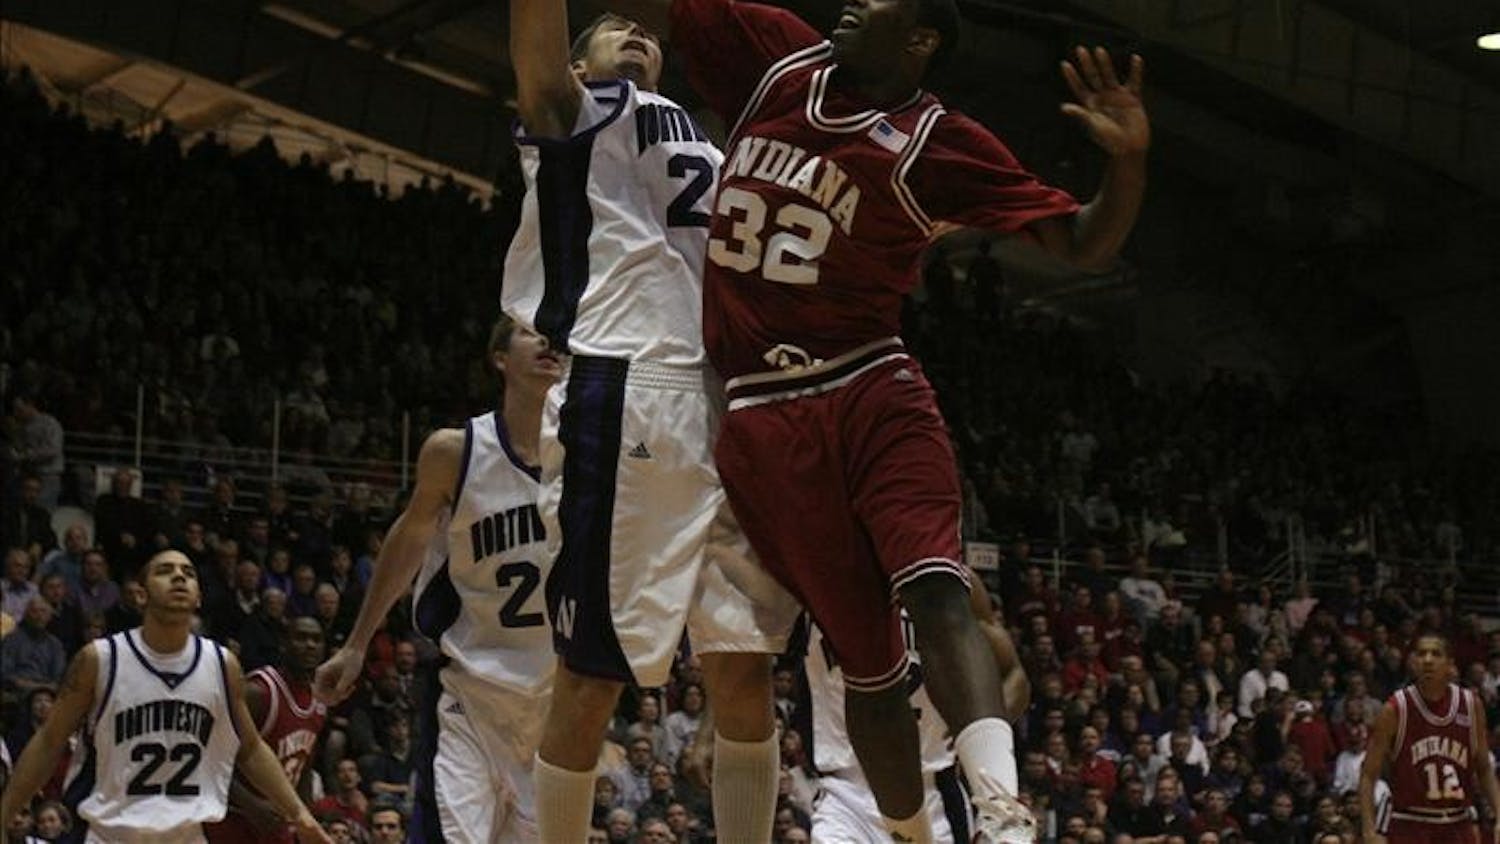 IU's Broderick Lewis is fouled going for a layup in the first half of Wednesday's game between the Hoosiers and Northwestern at Welsh-Ryan Arena in Evanston, Ill.